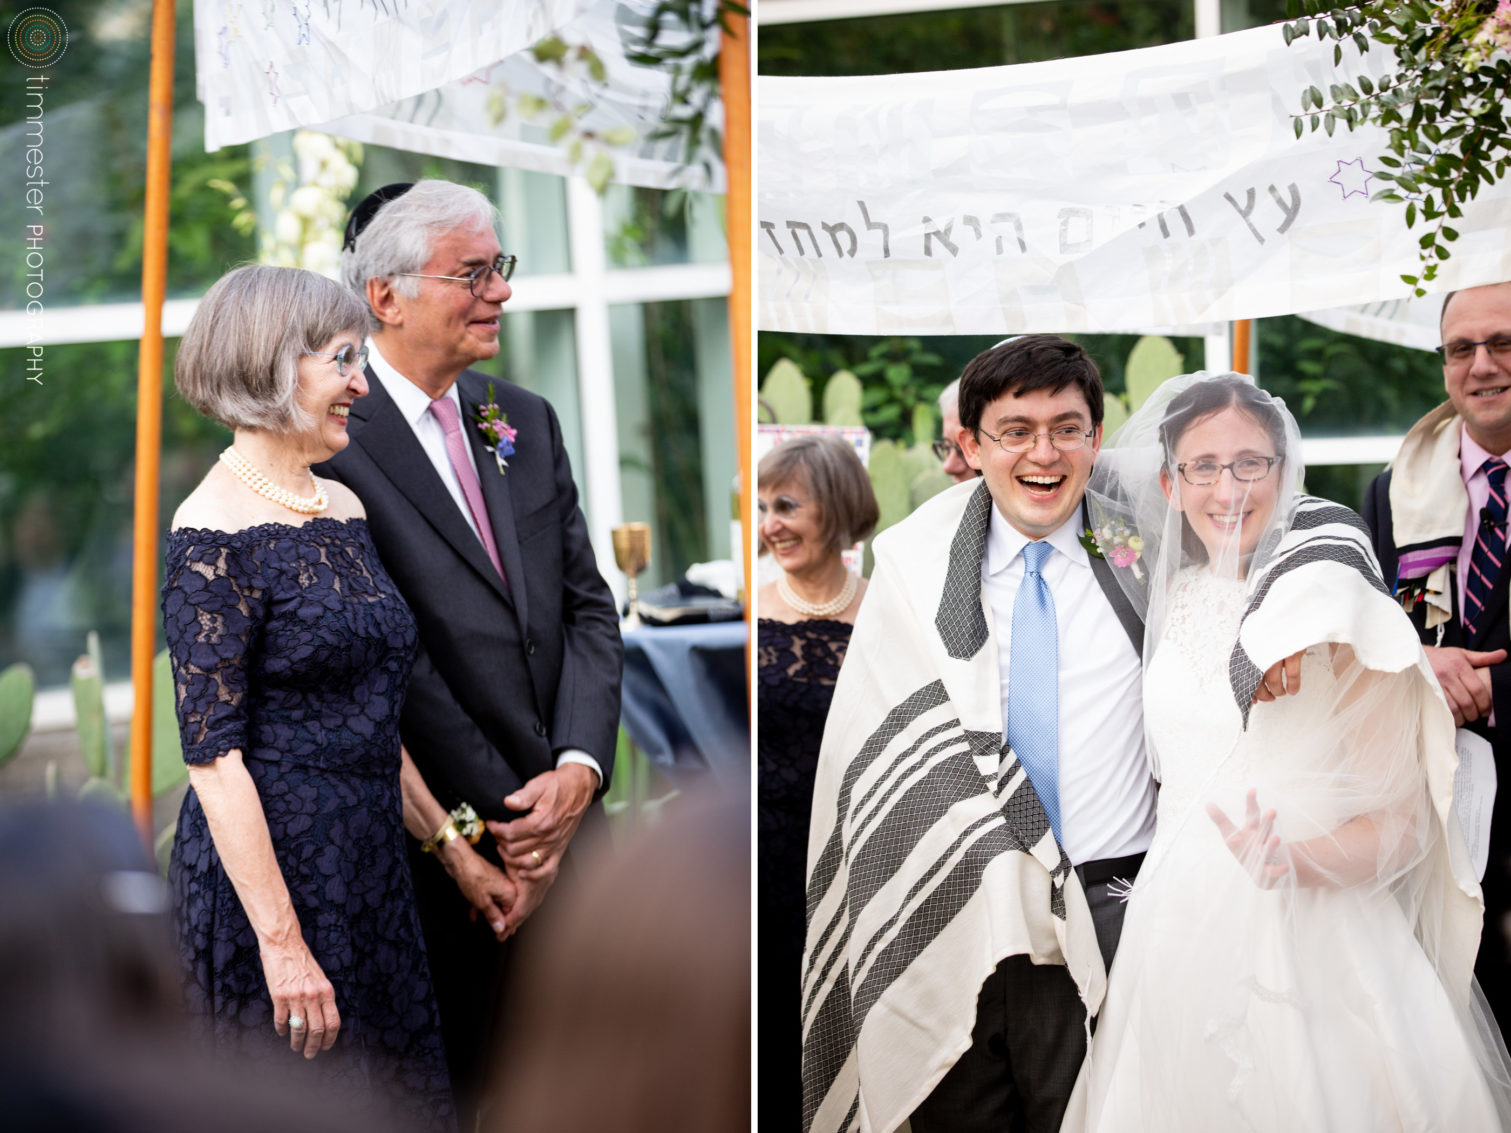 An outdoor Jewish wedding ceremony in Durham, NC at the Museum of Life and Science